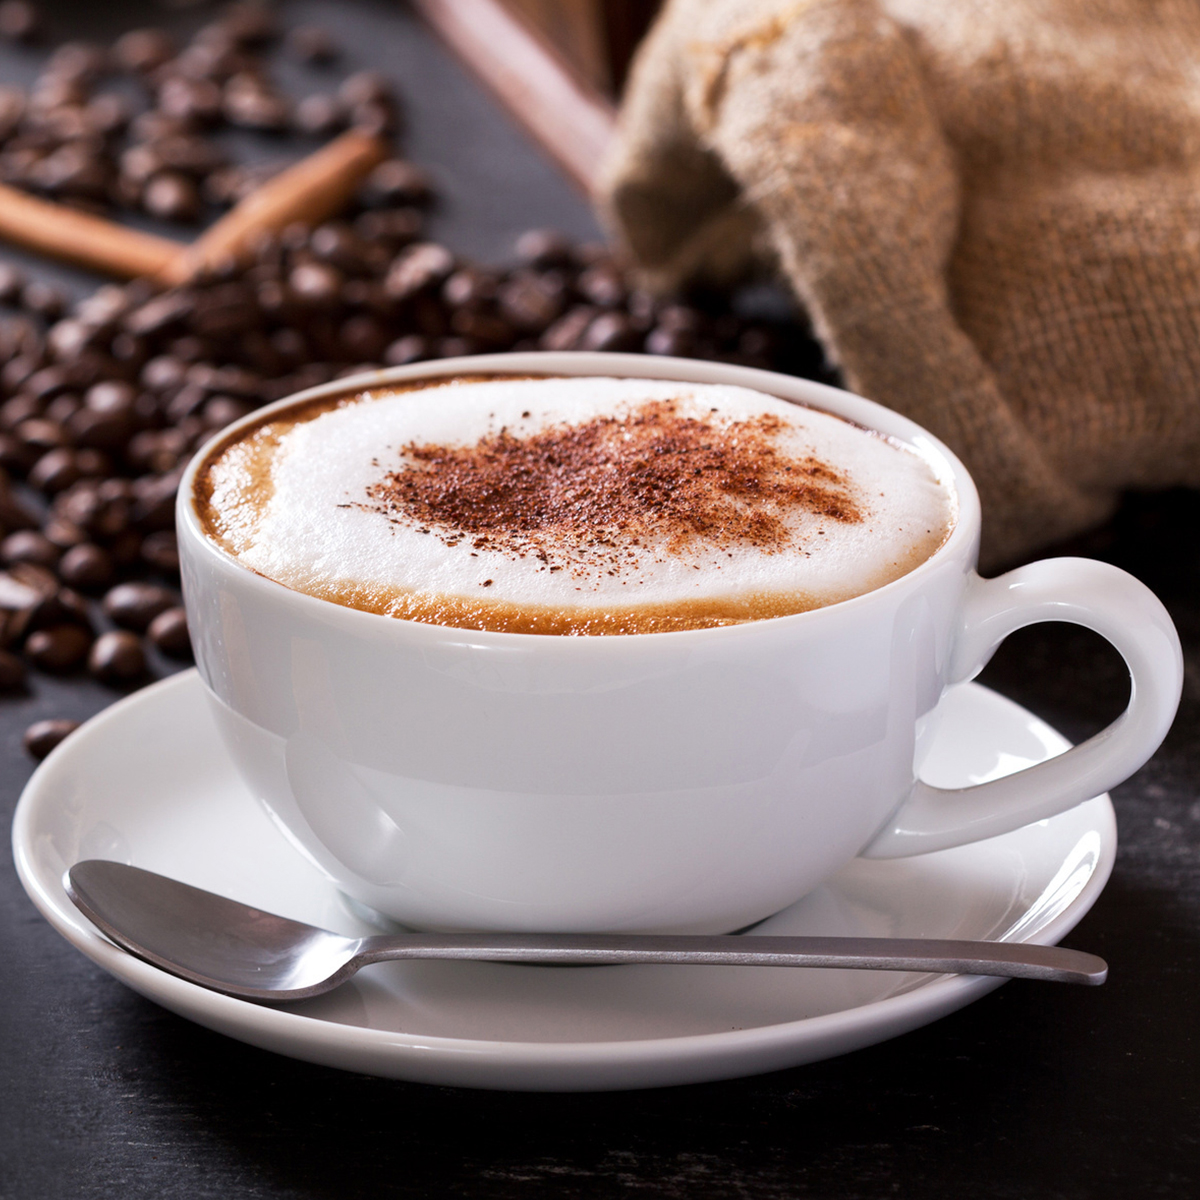 Warm up your winter with an Italian cappuccino - Italy Food Culture Tours